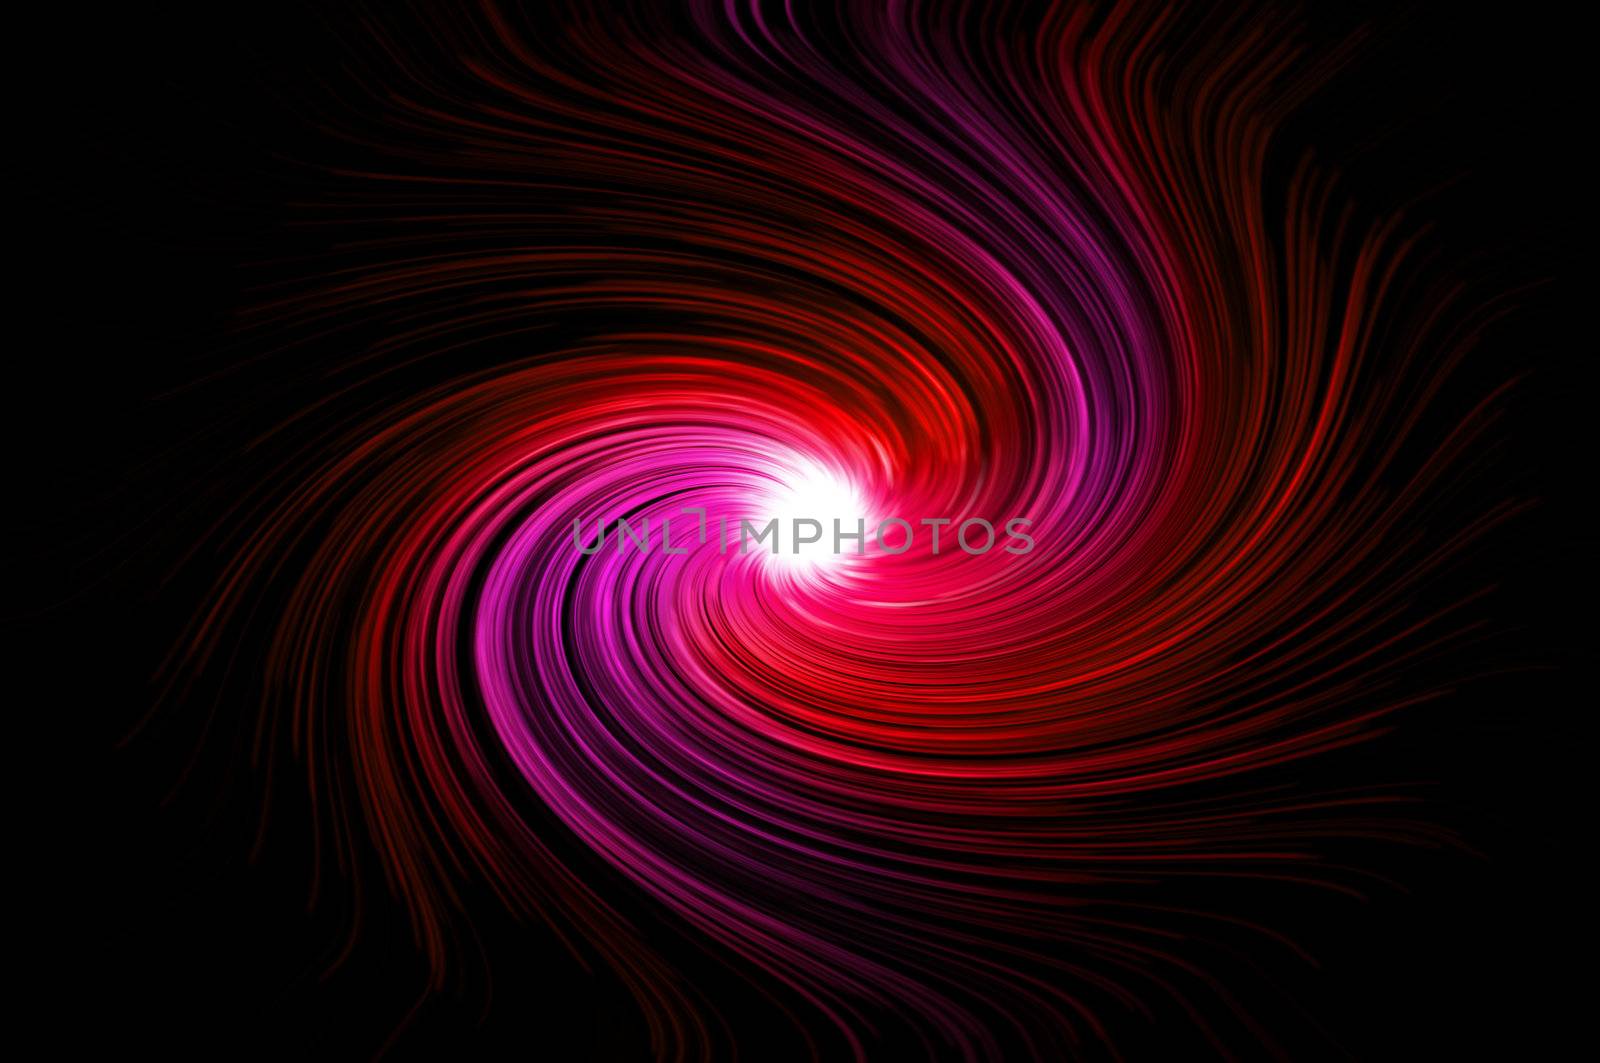 Vibrant red swirl by 72soul